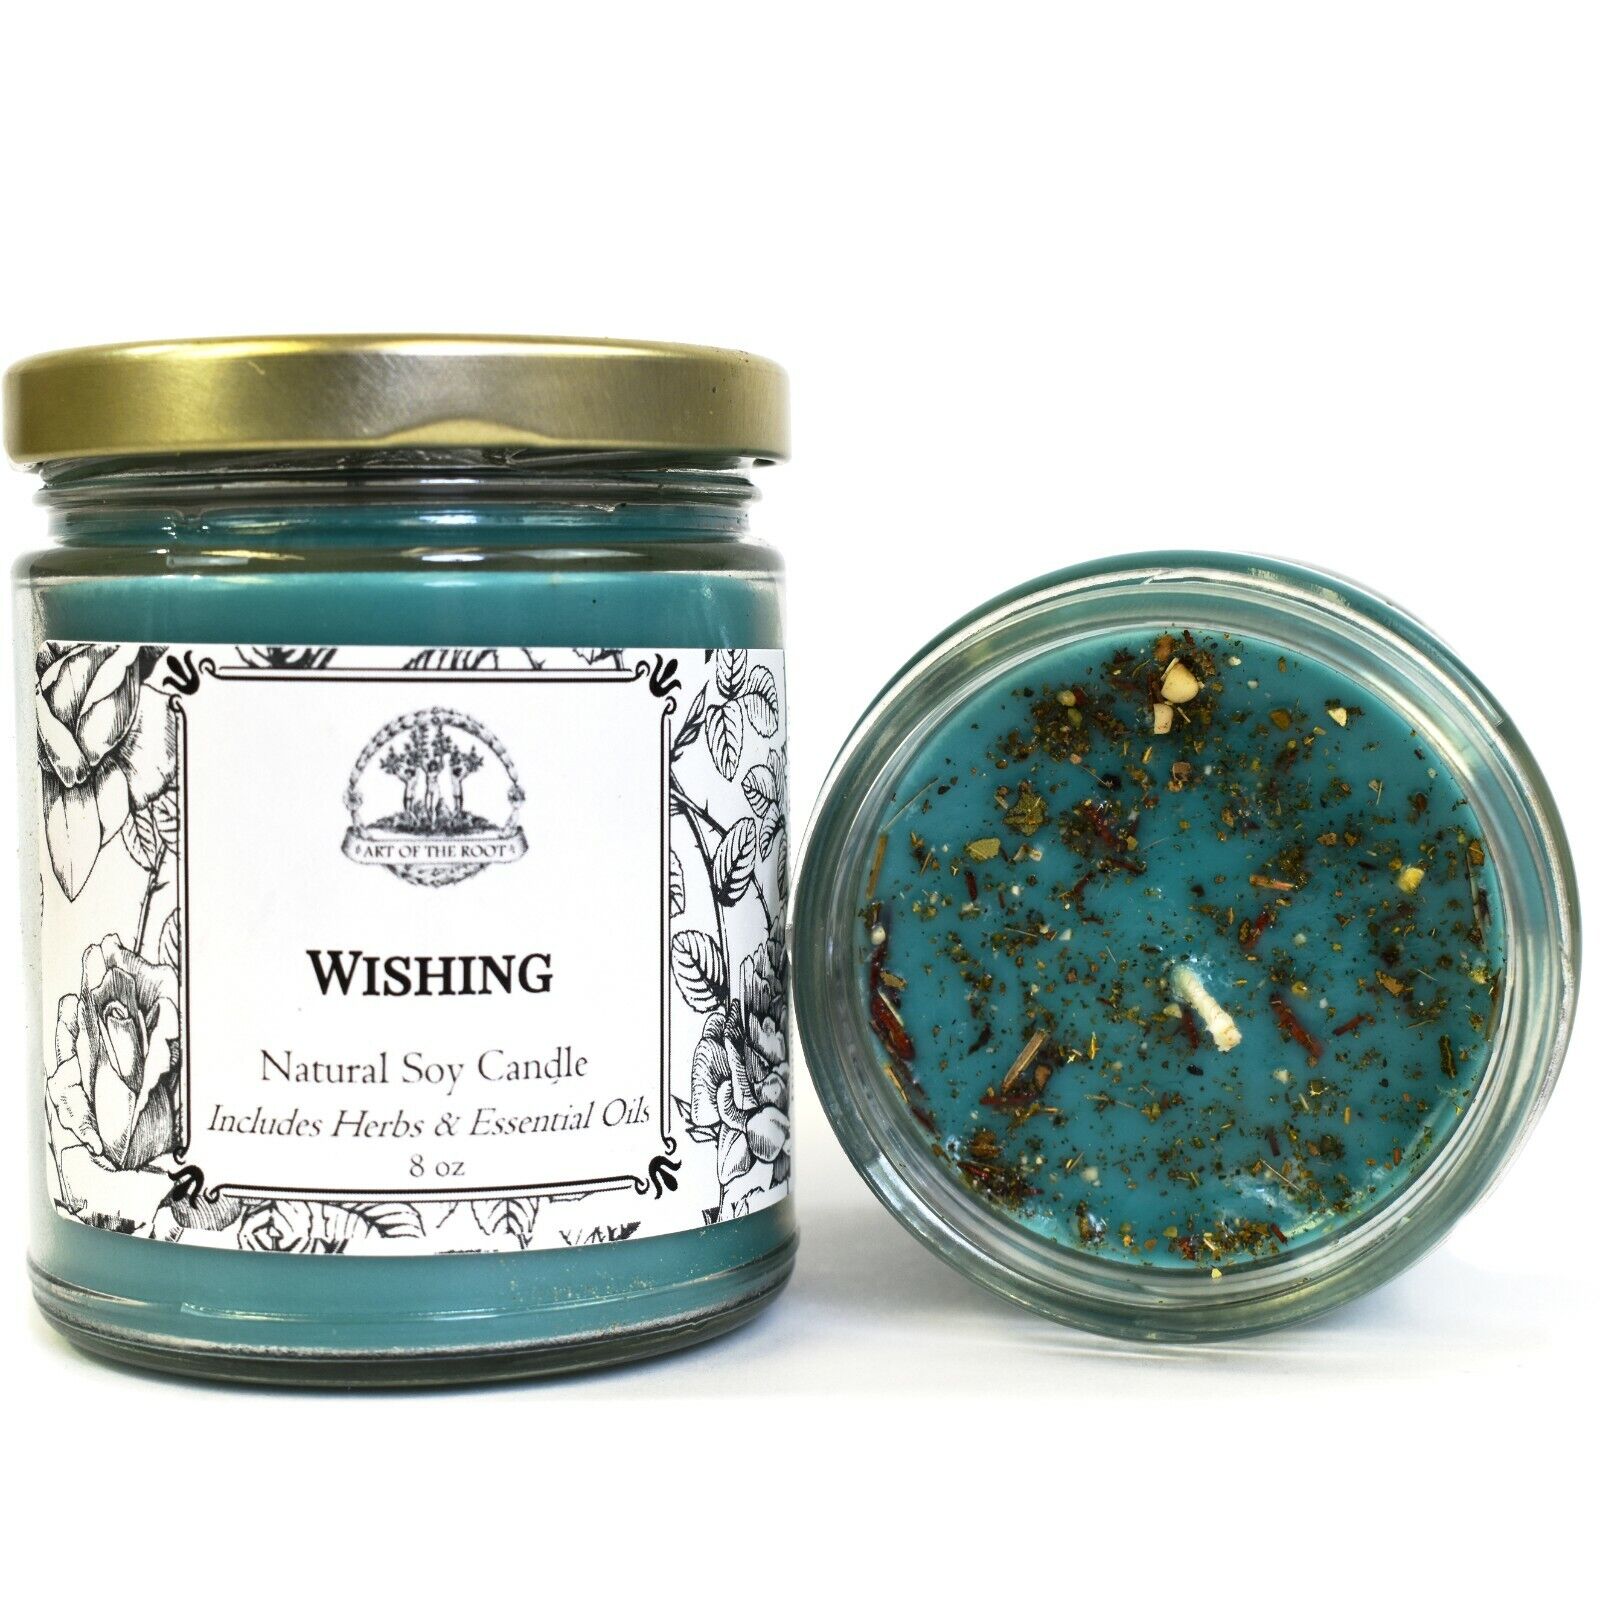 Wishing Soy Spell Candle Blessings Wishes Desires Goals Hoodoo Wiccan Pagan 